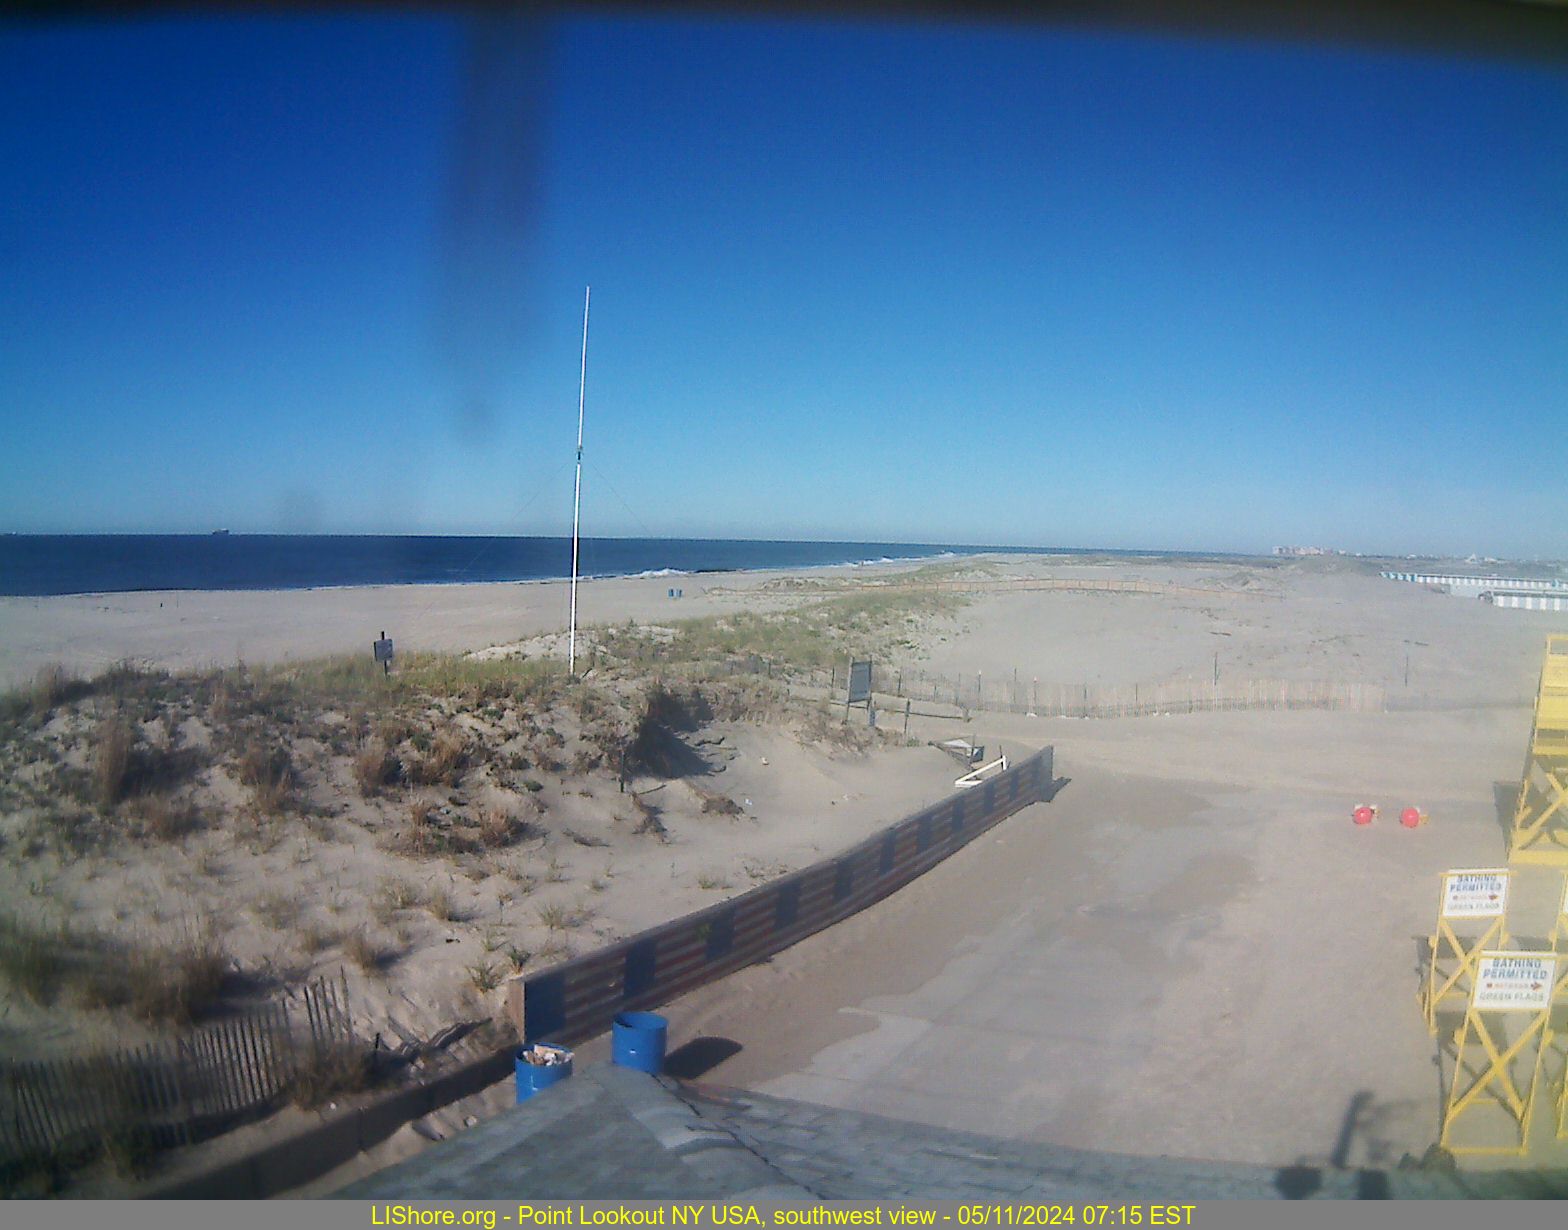 Point Lookout NY USA - new camera southeast view